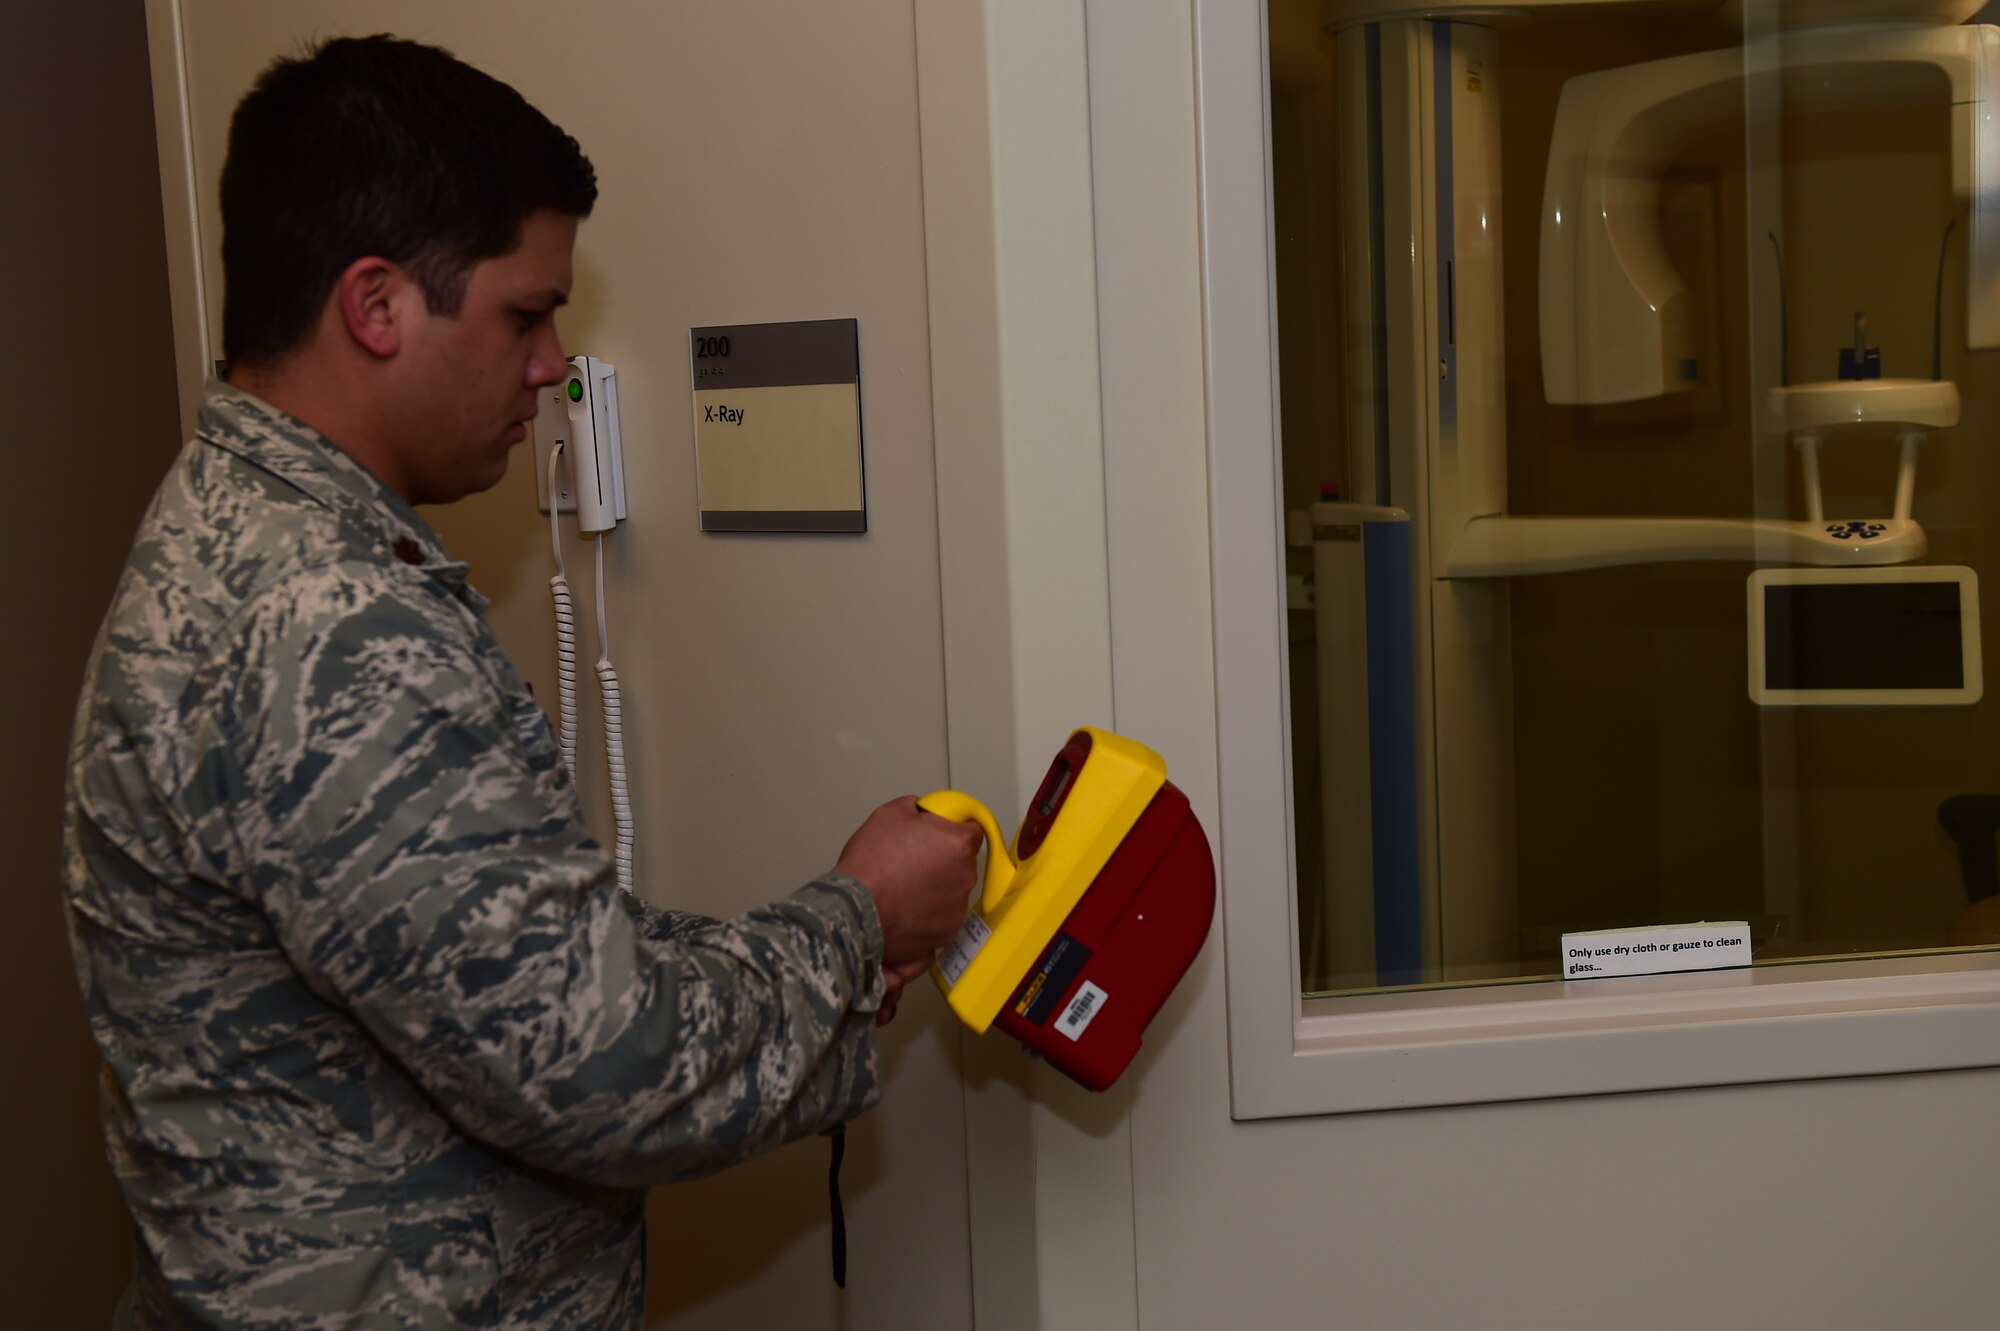 Maj. Alfred Felipe, 460th Medical Group bioenvironmental element chief, checks the radiation levels Jan. 19, 2016, in the soon-to-open 460th MDG dental clinic on Buckley Air Force Base, Colo. As a bioenvironmental officer, Felipe provides occupational health support, ensures drinking water quality and provides emergency response. (U.S. Air Force photo by Airman 1st Class Gabrielle Spradling/Released)